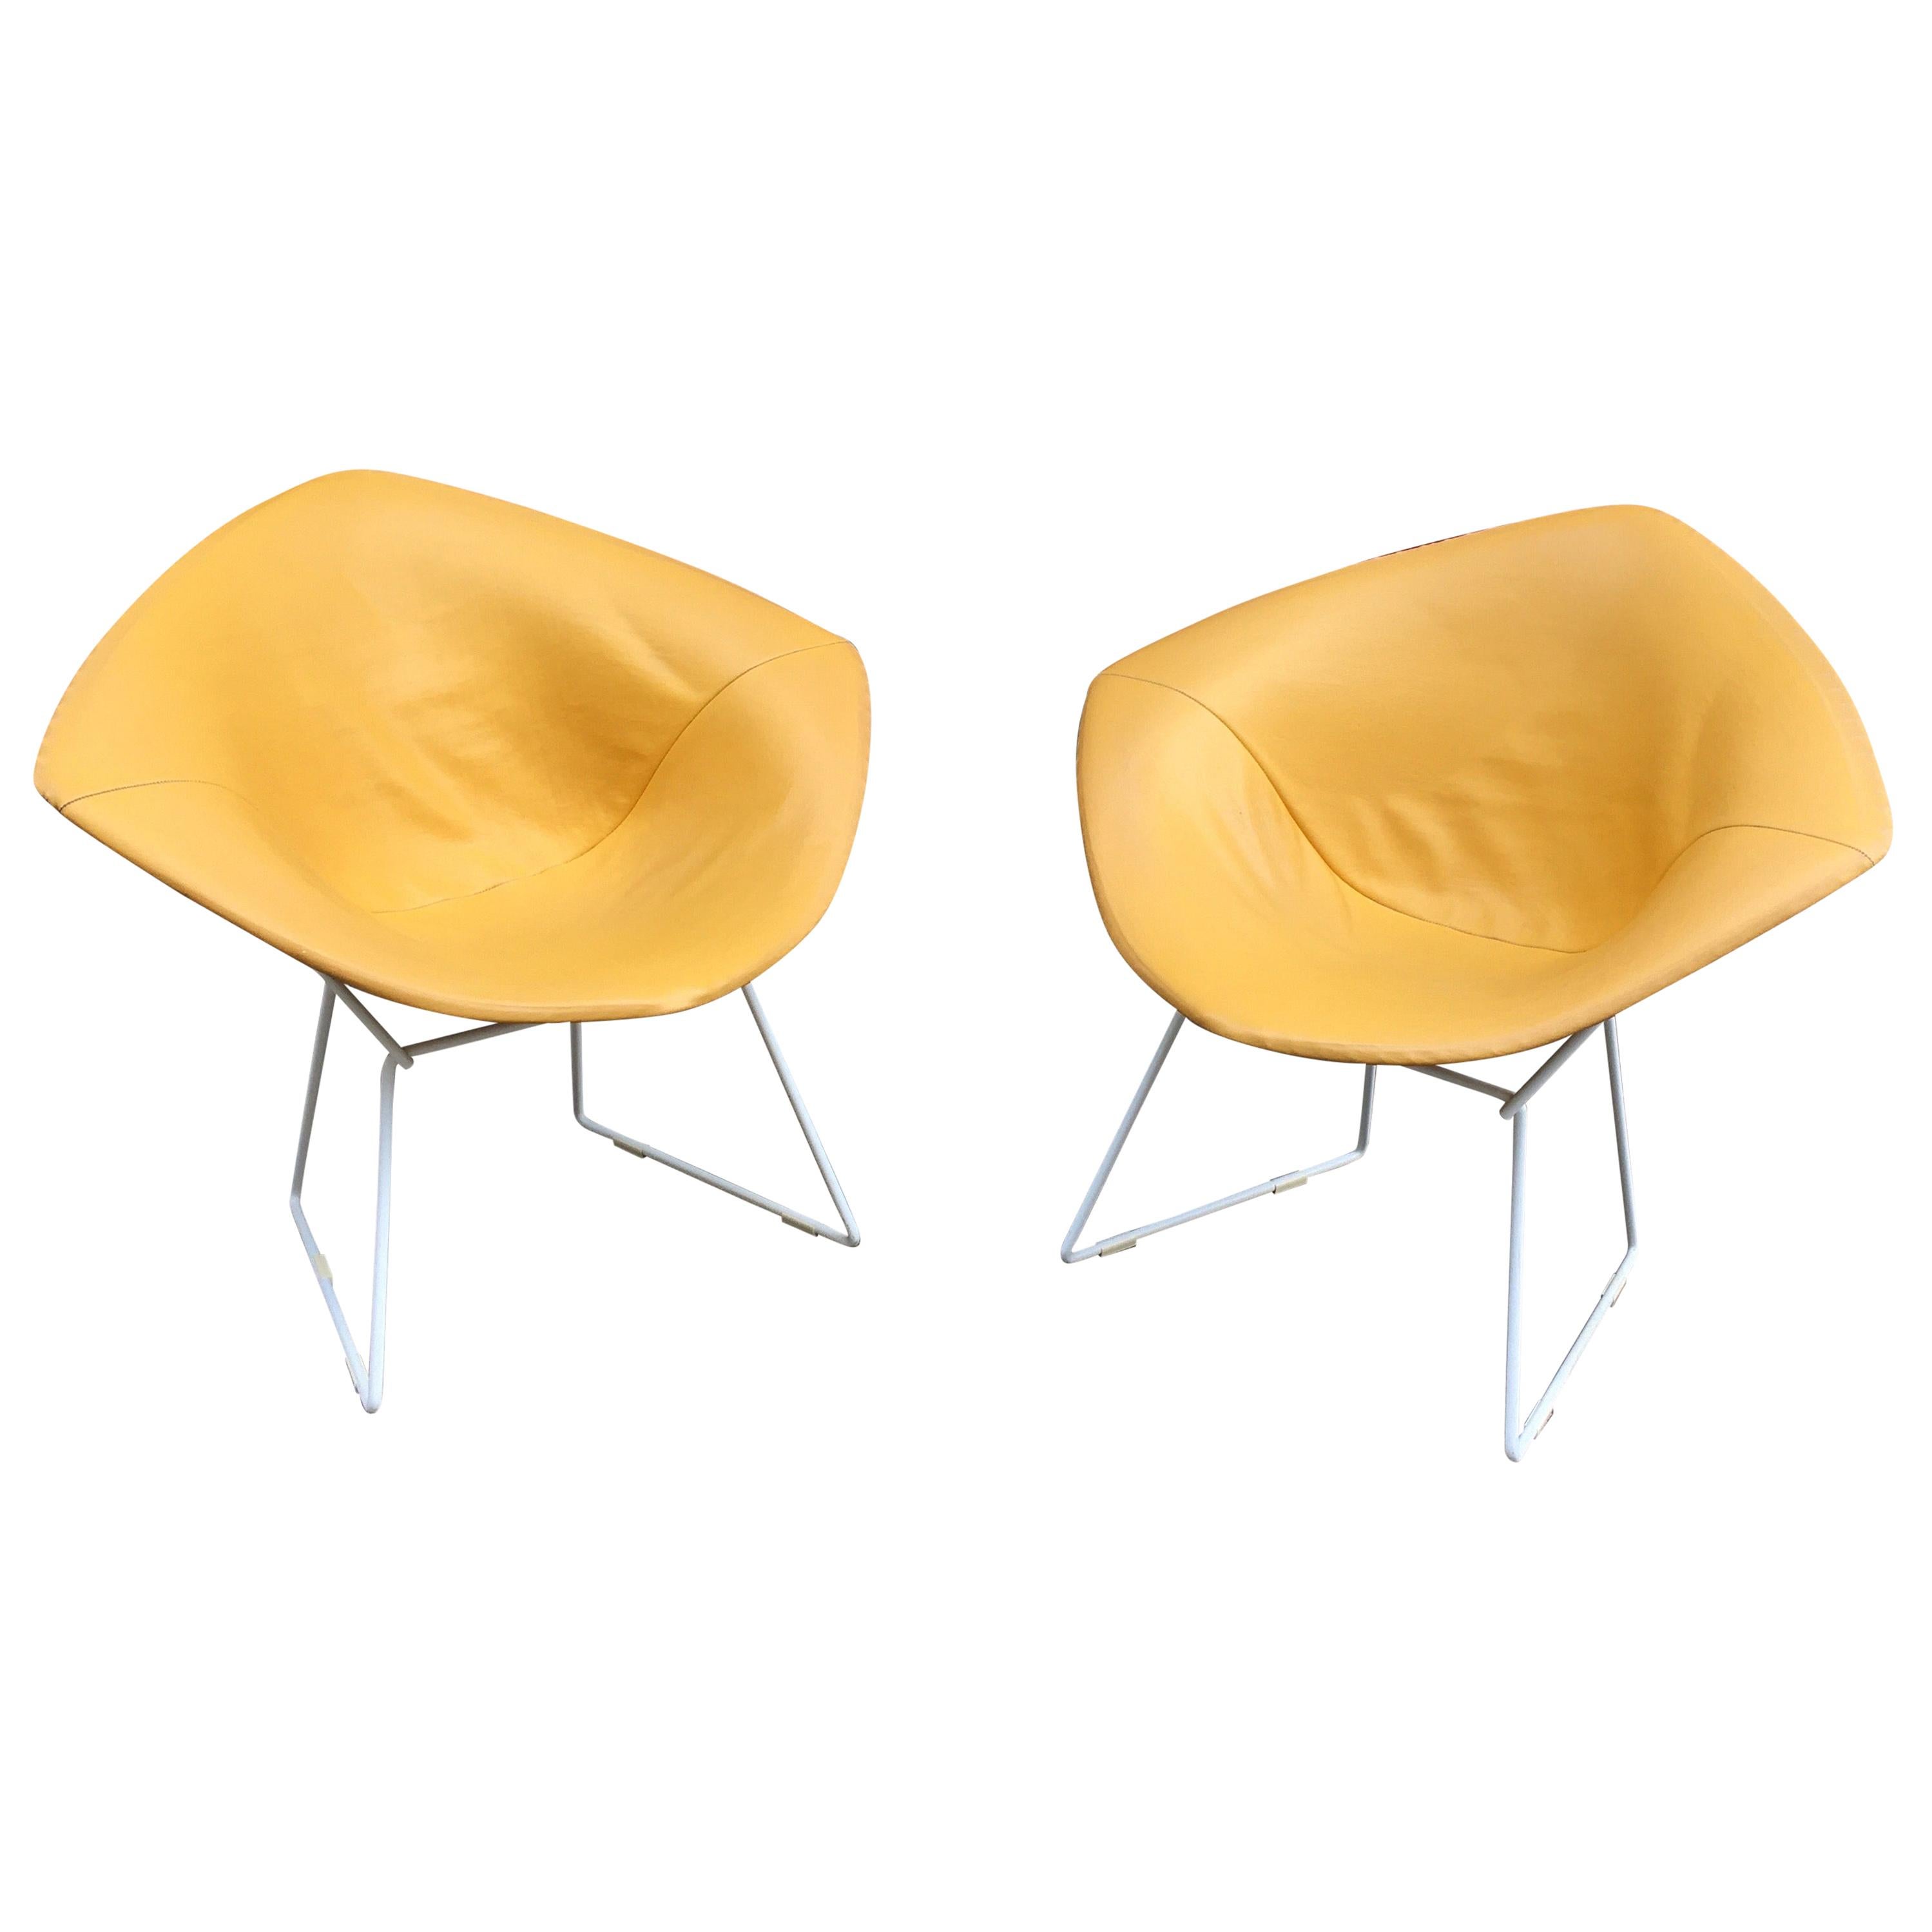 Pair of Harry Bertoia for Knoll Diamond Chairs